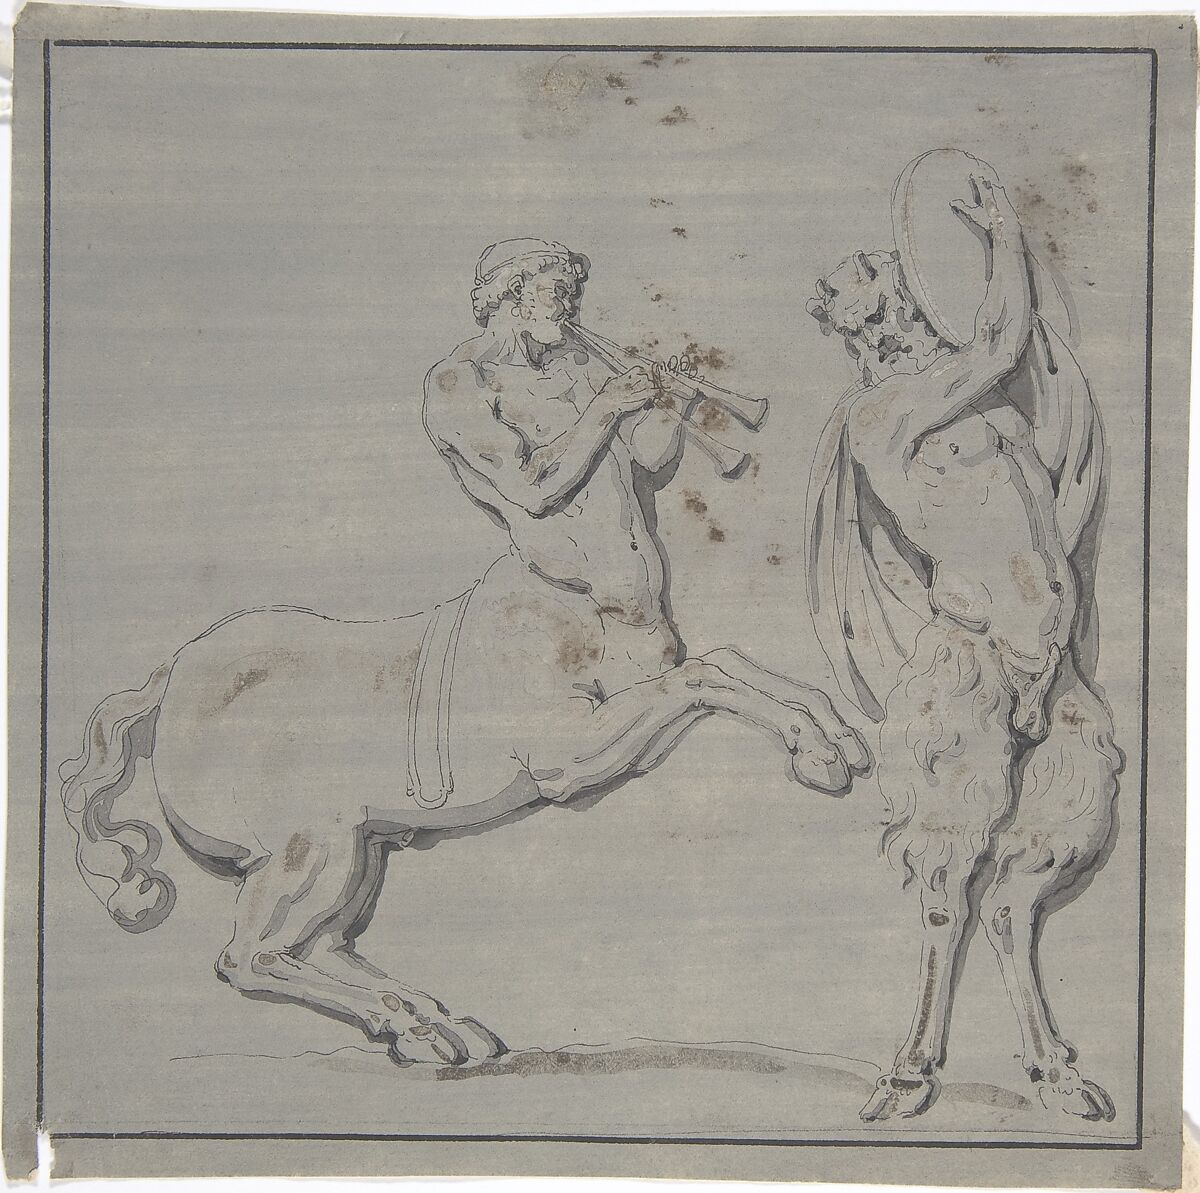 Bacchic Scene of Centaur Playing Horns and Satyr with Drum, Anonymous, French, 18th century, Pen and black ink, brush and brown and gray wash on paper. 